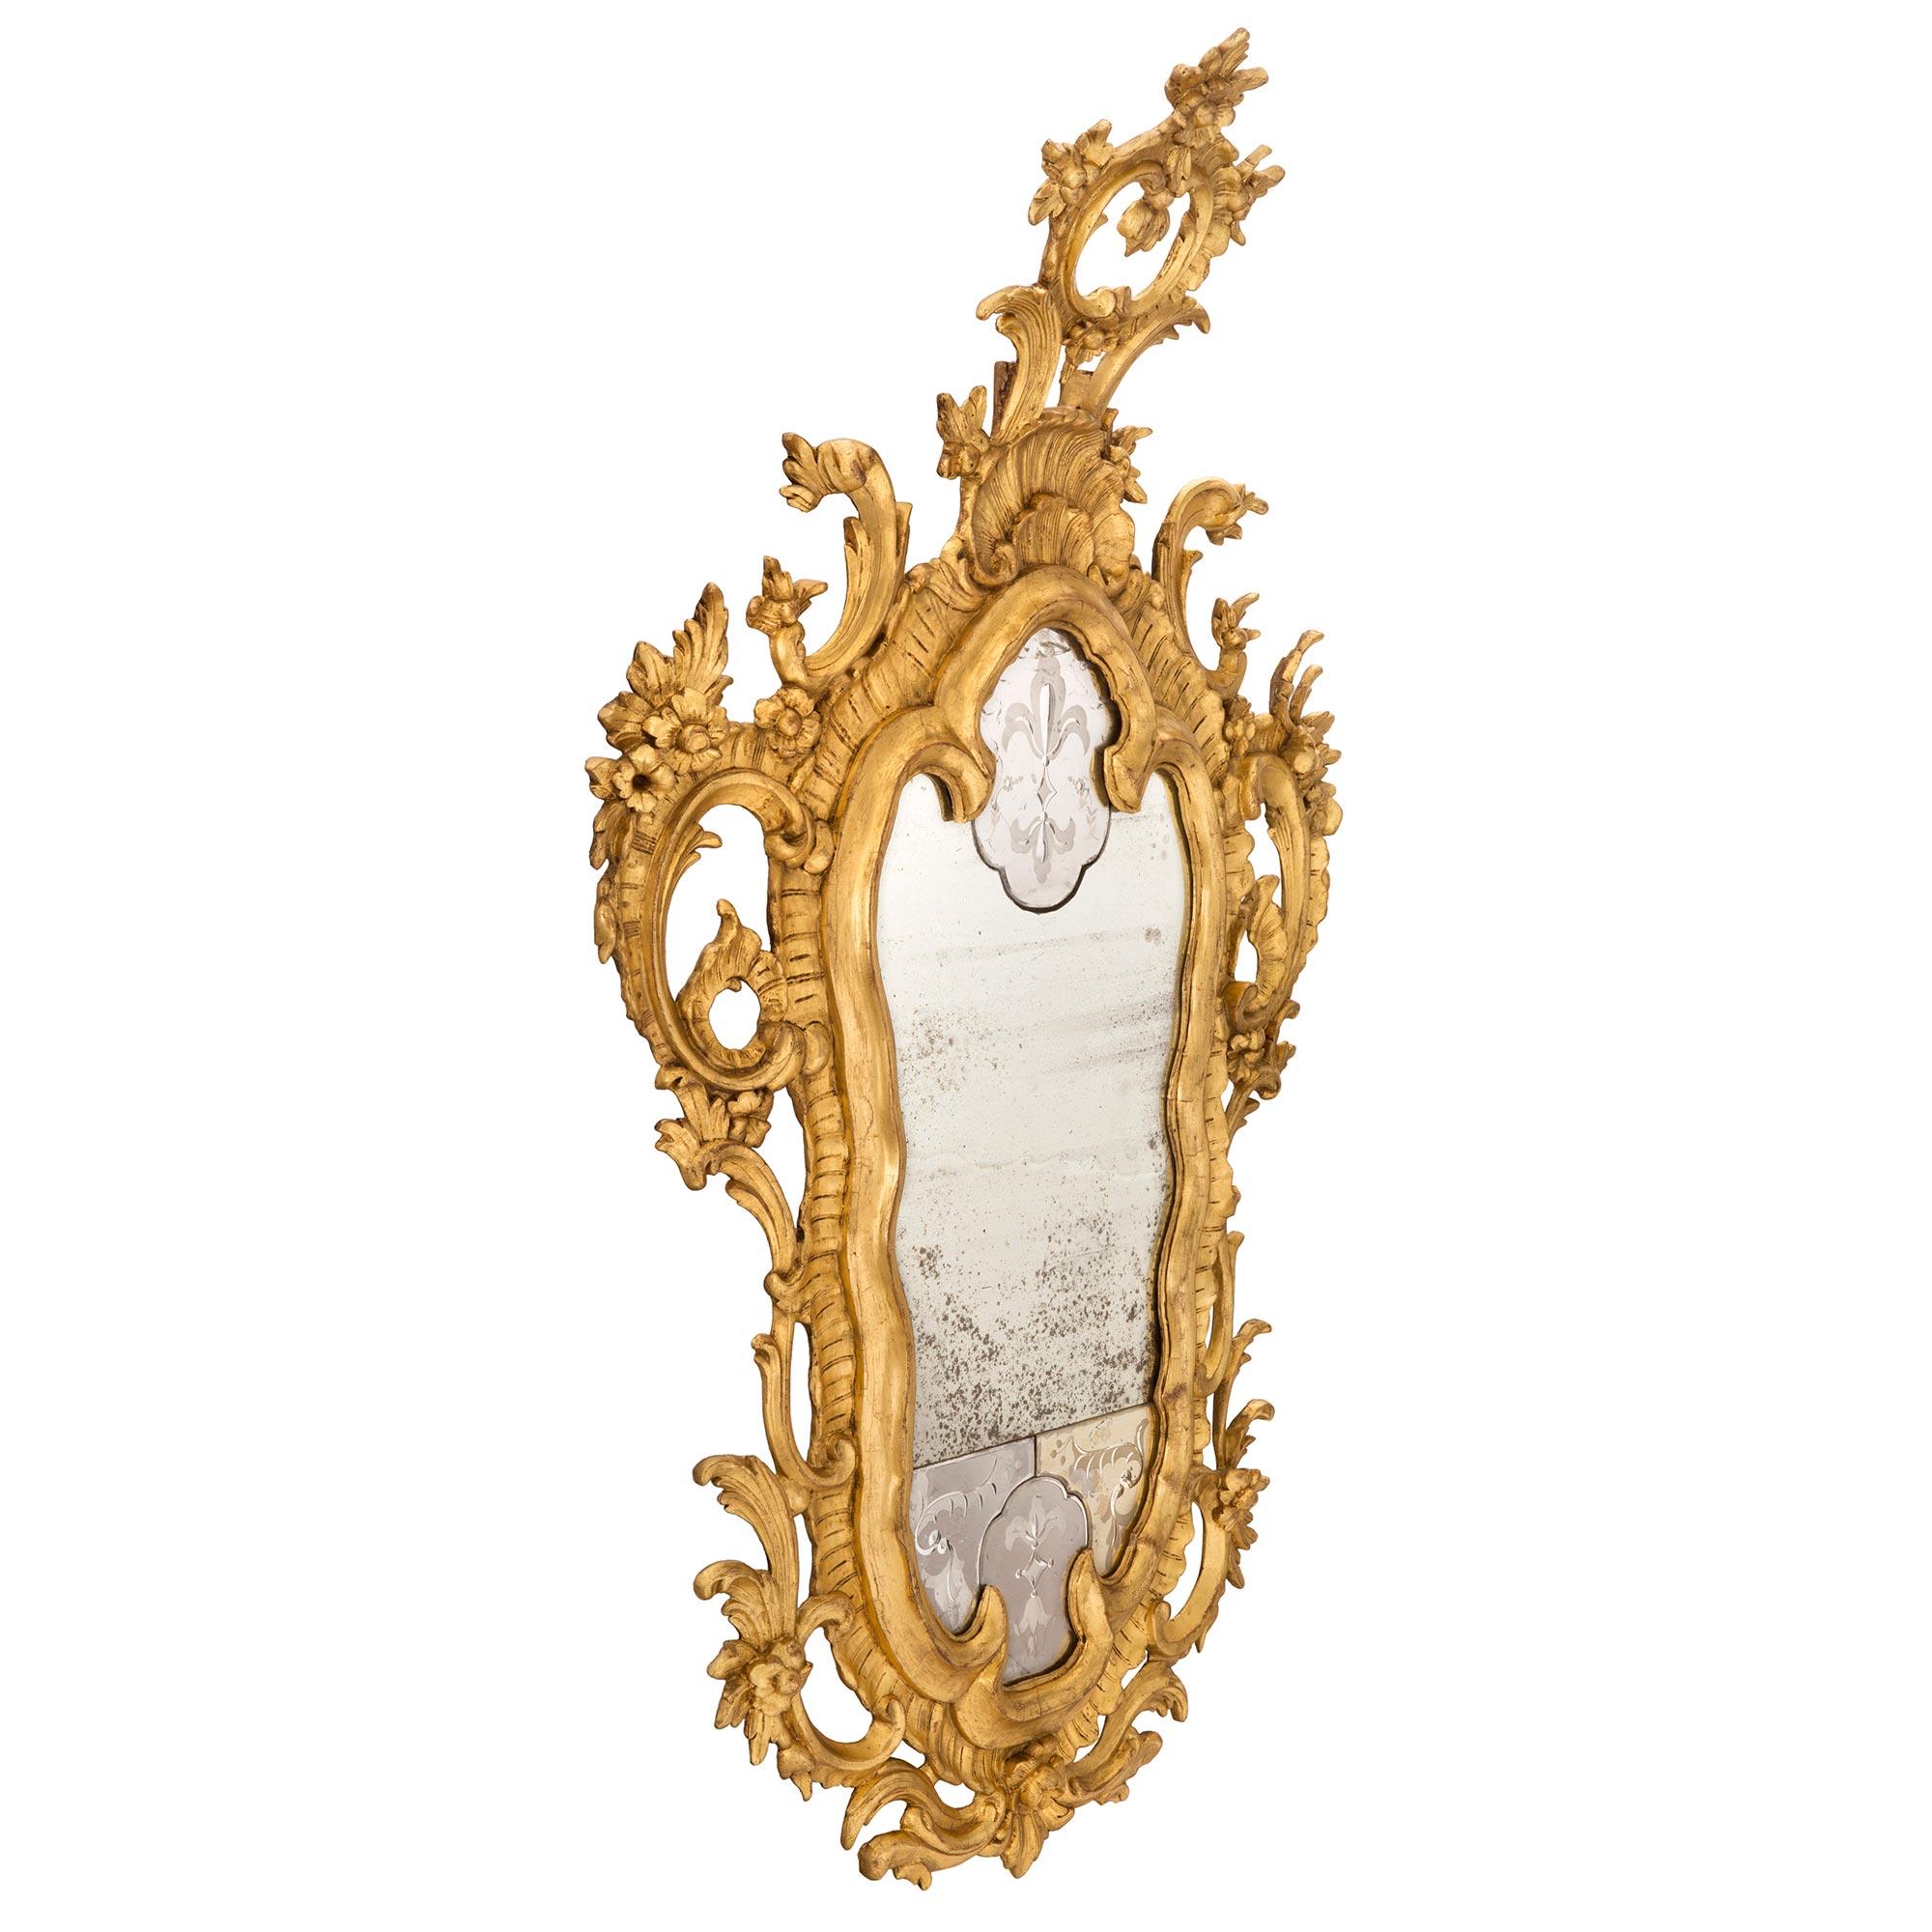 A stunning pair of Italian 18th century Venetian style giltwood mirrors. Each most decorative mirror retains all of their original mirror plates with the top and bottom plates displaying beautiful wonderfully executed etched foliate designs and